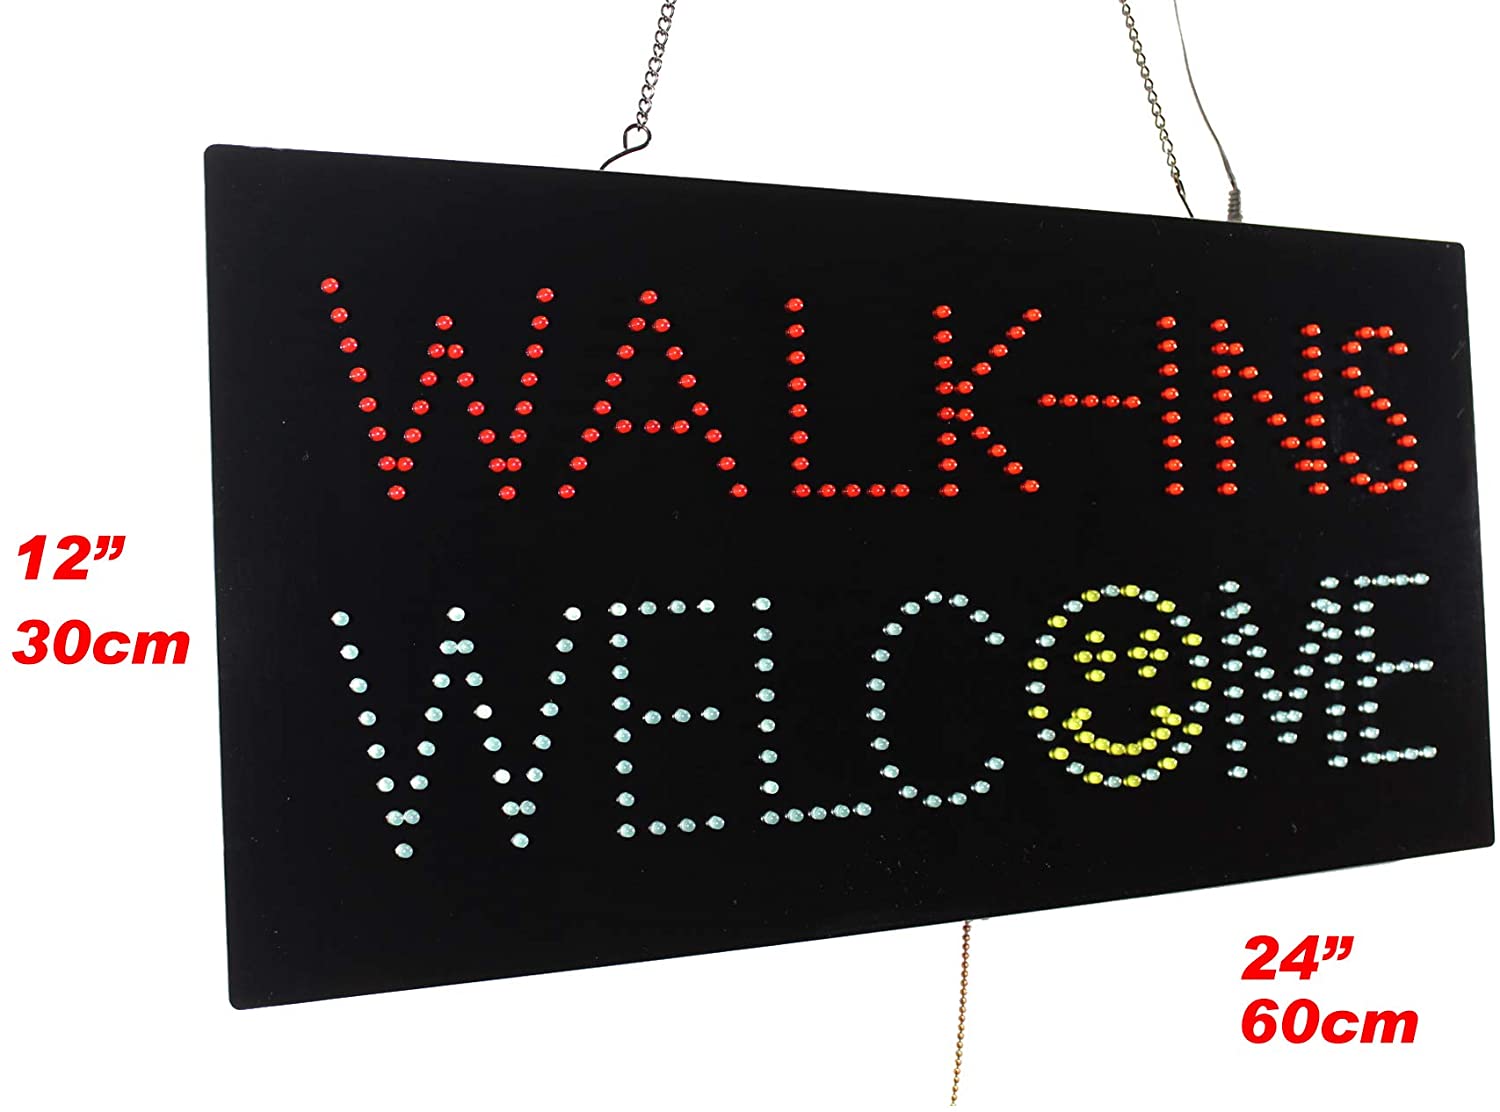 Walk-ins Welcome Sign, TOPKING Signage, LED Neon Open, Store, Window, Shop, Business, Display, Grand Opening Gift-10001